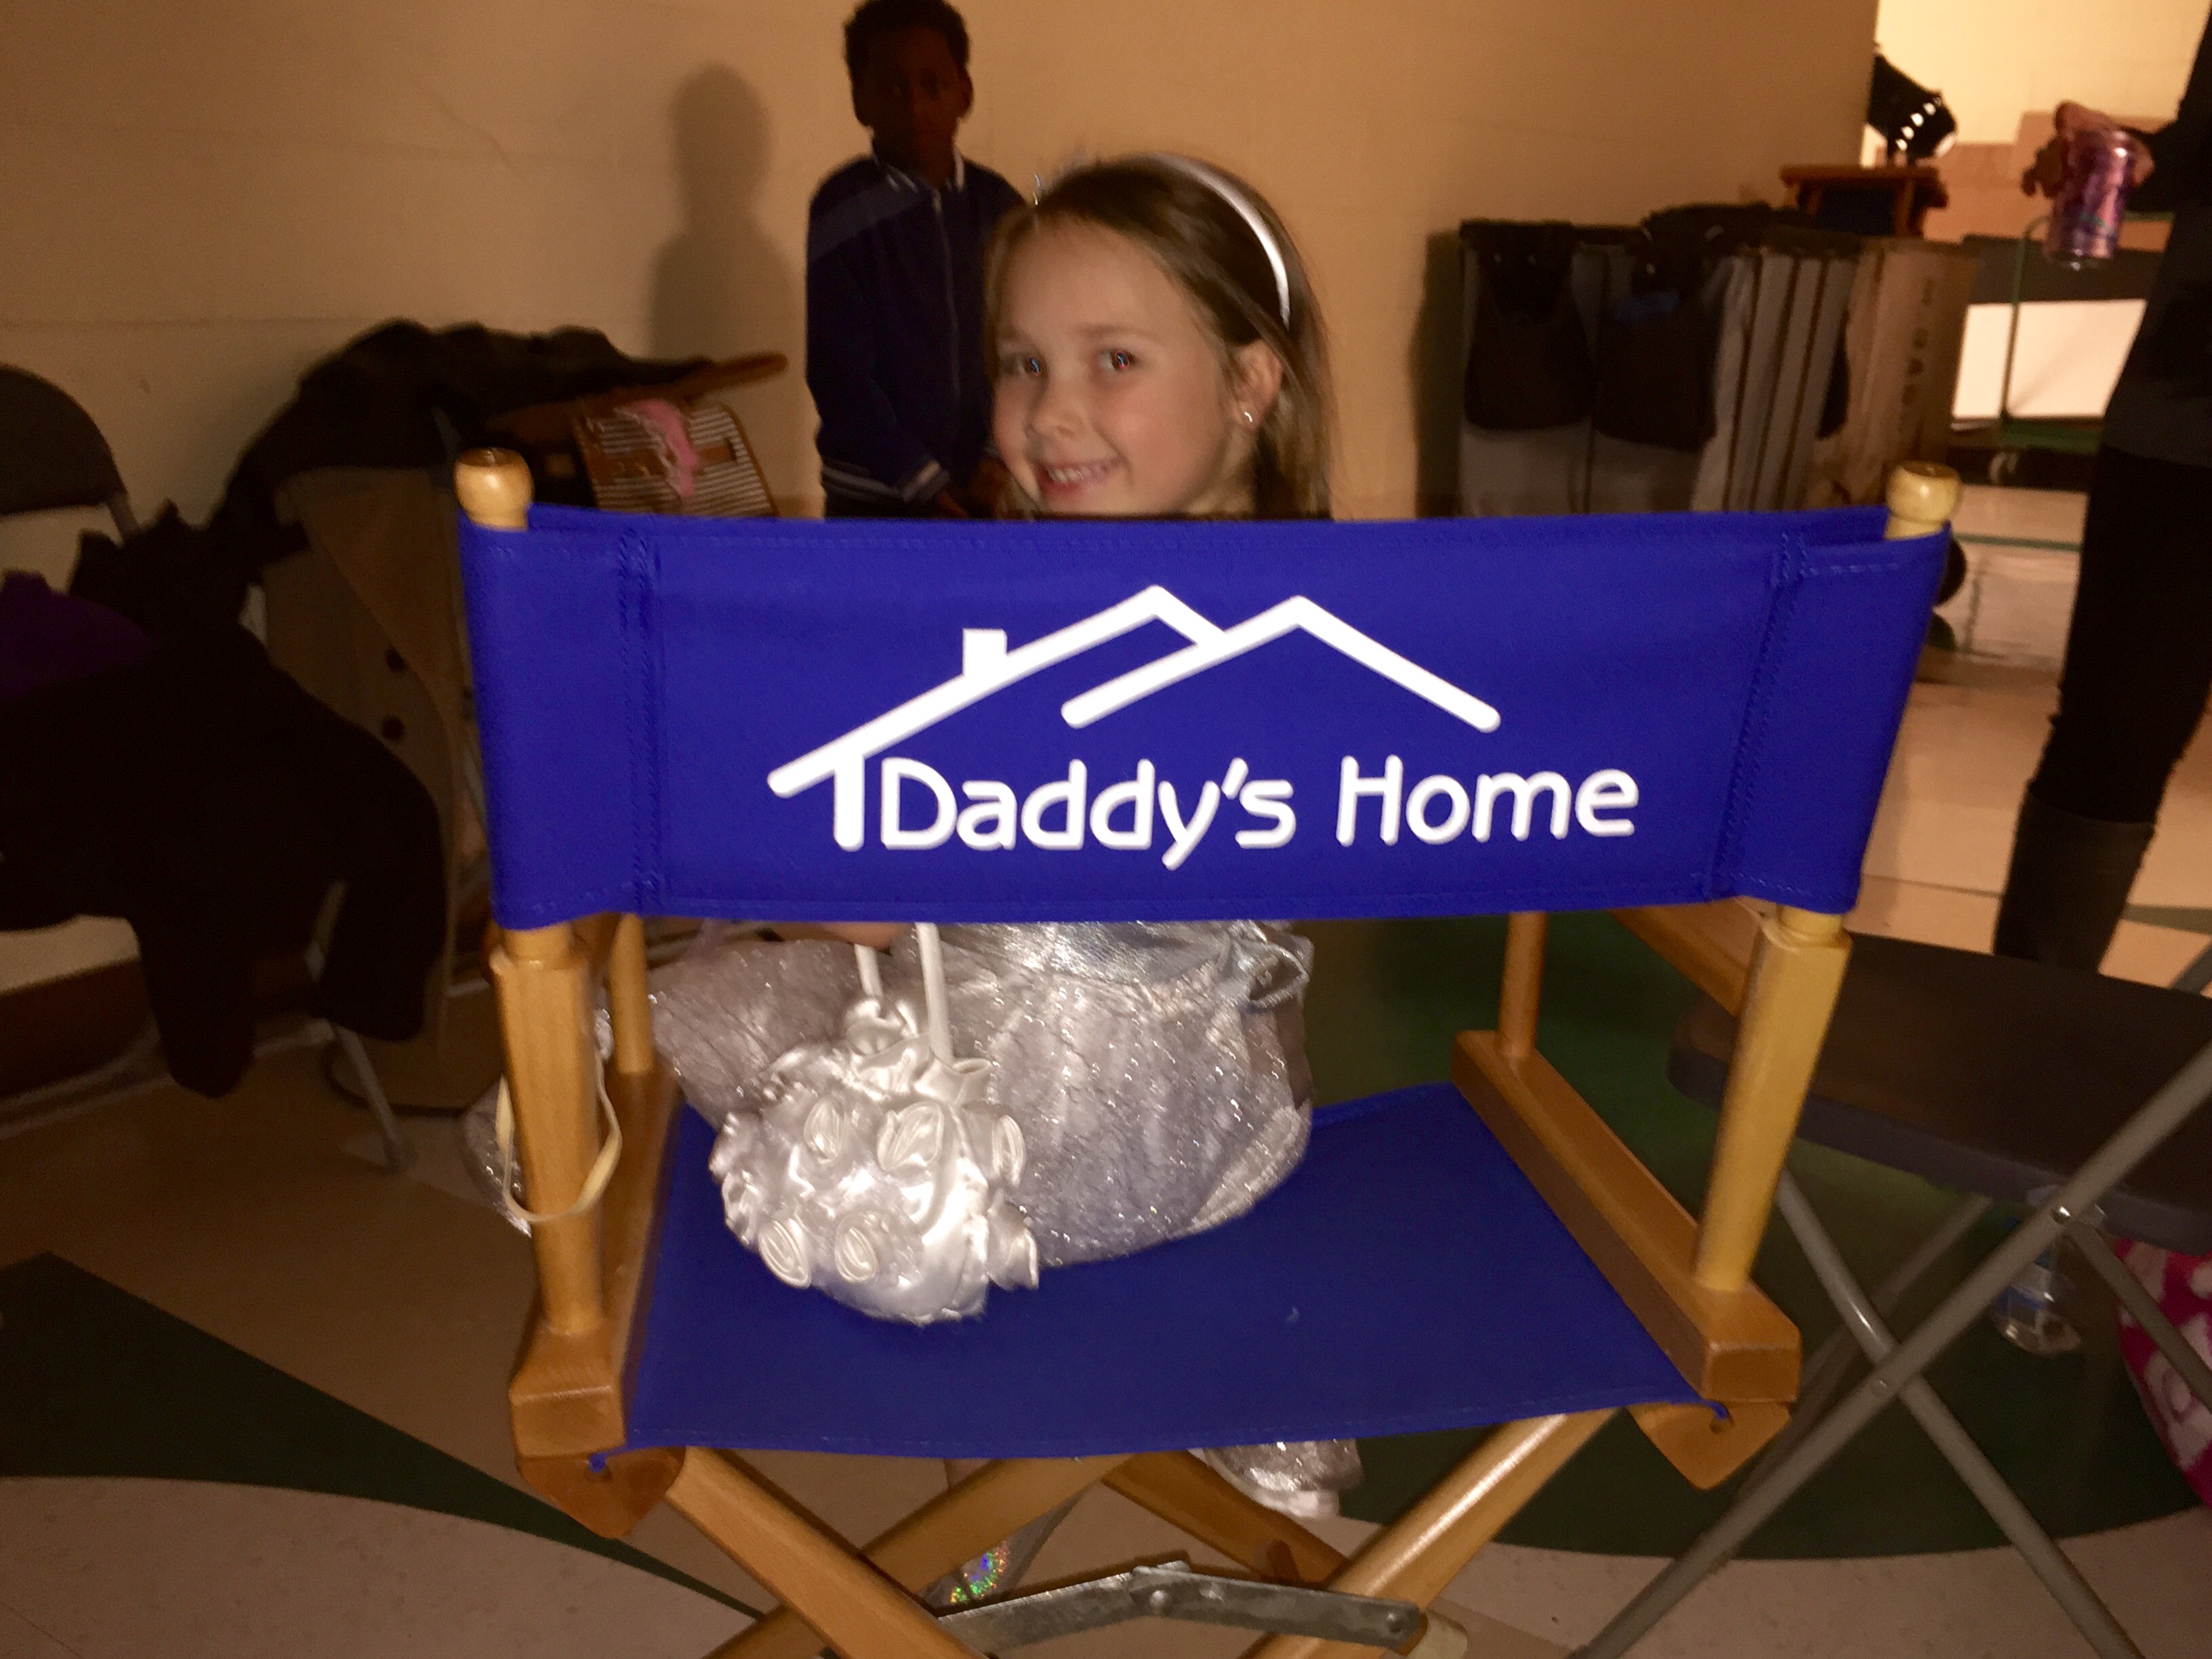 On the set of Daddy's Home